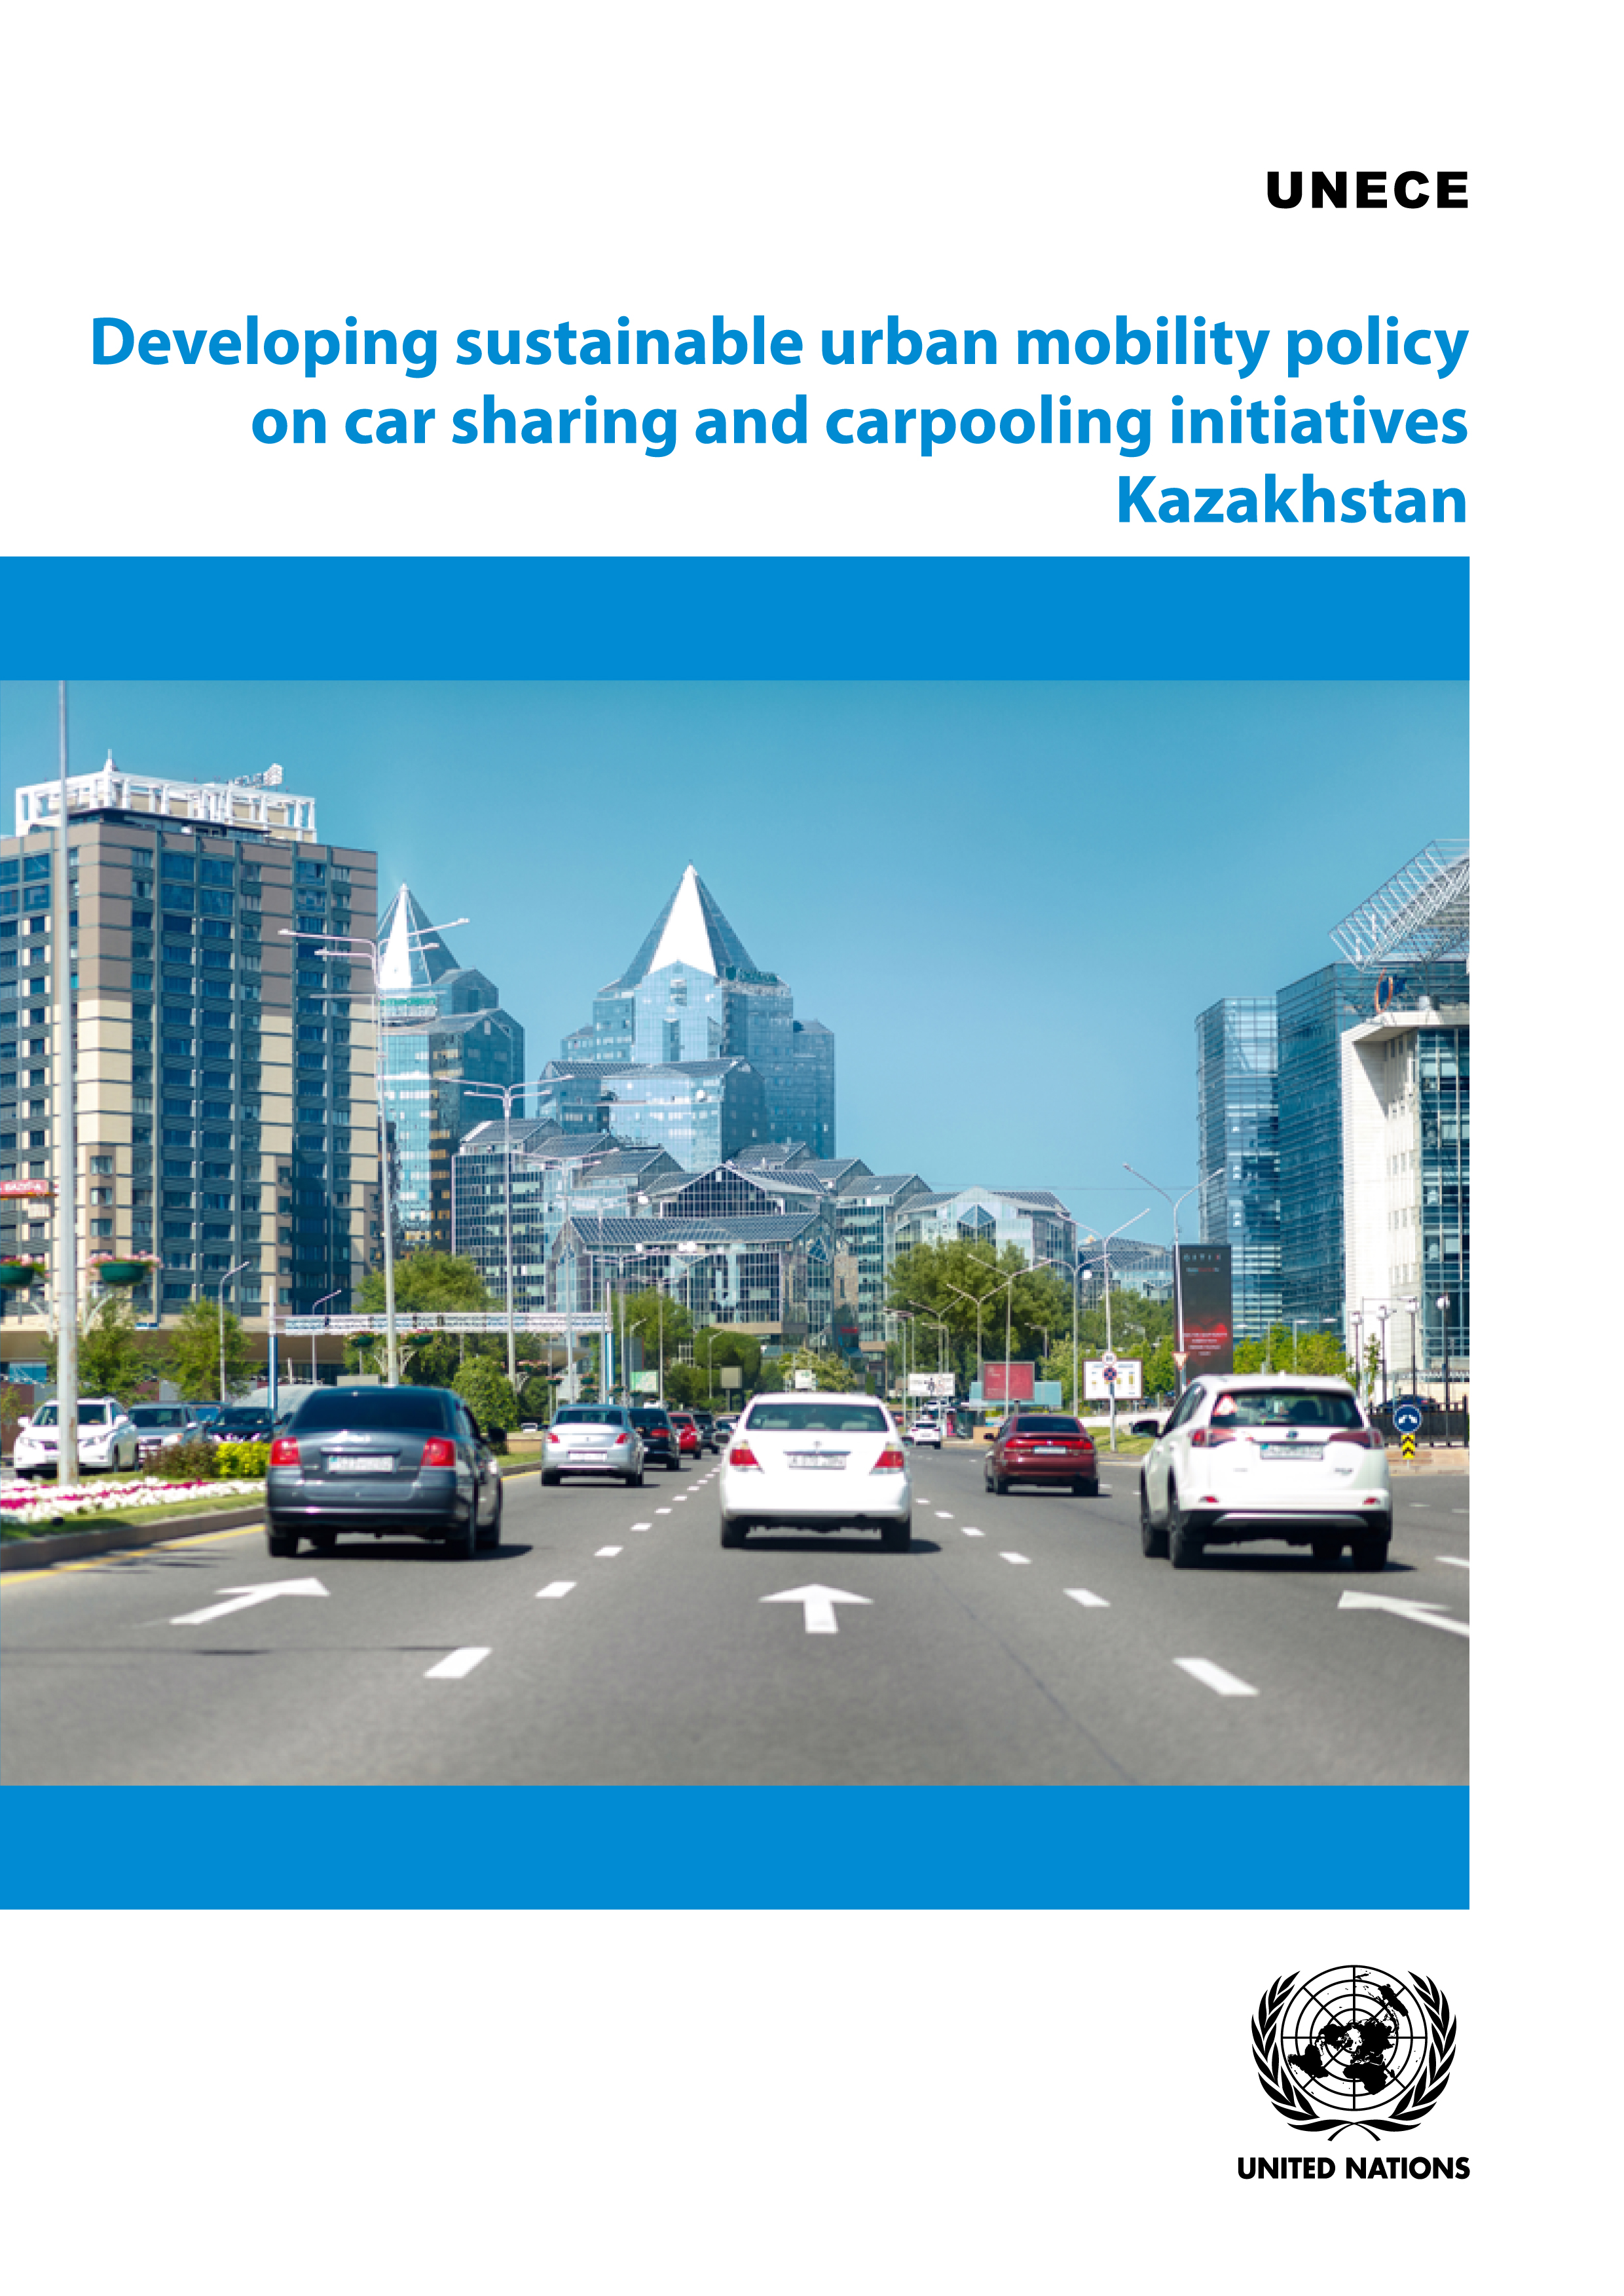 image of Developing Sustainable Urban Mobility Policy on Car Sharing and Carpooling Initiatives - Kazakhstan